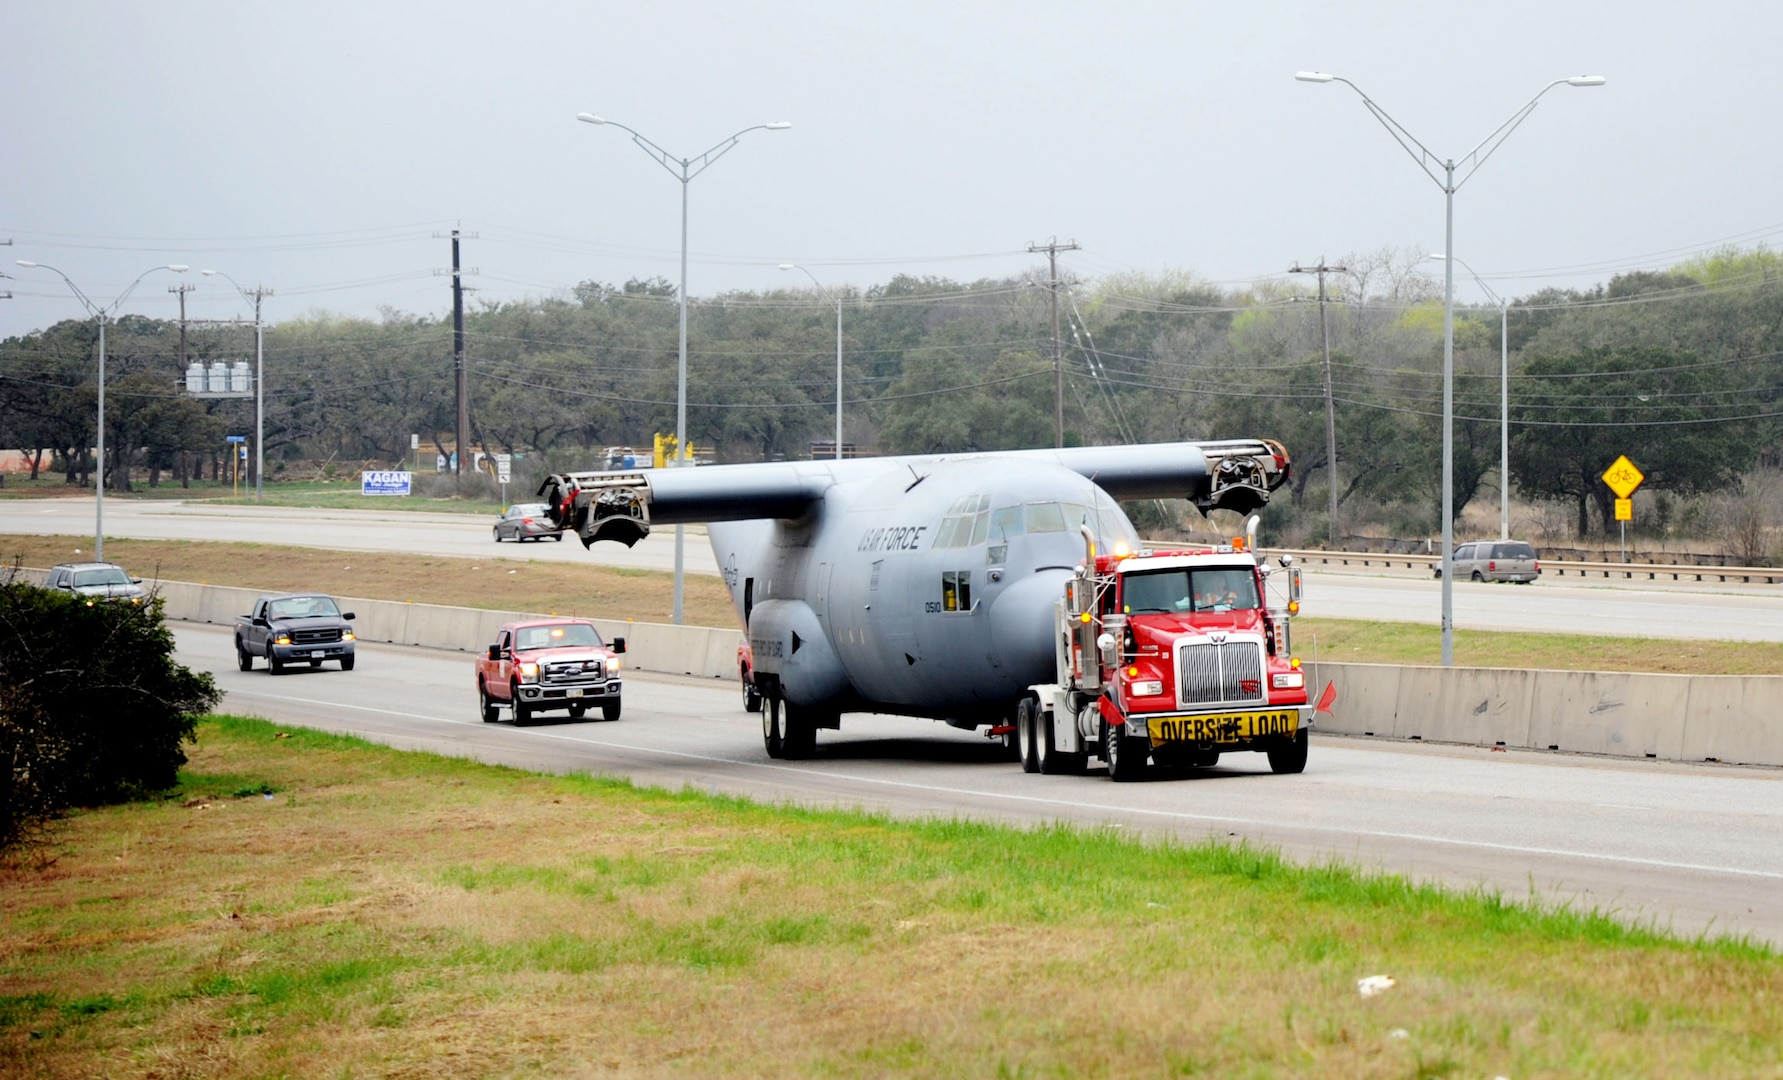 A retired and partially disassembled Air Force C-130 Hercules cargo aircraft is towed across major San Antonio highways March 2 enroute from Joint Base San Antonio-Lackland to the 937th Training Group Medical Readiness Training Center at JBSA-Camp Bullis. C-130s are capable of operating from rough, dirt strips and is the prime transport for airdropping troops and equipment into hostile areas. (U.S. Air Force photo by Airman 1st Class Kenna Jackson)